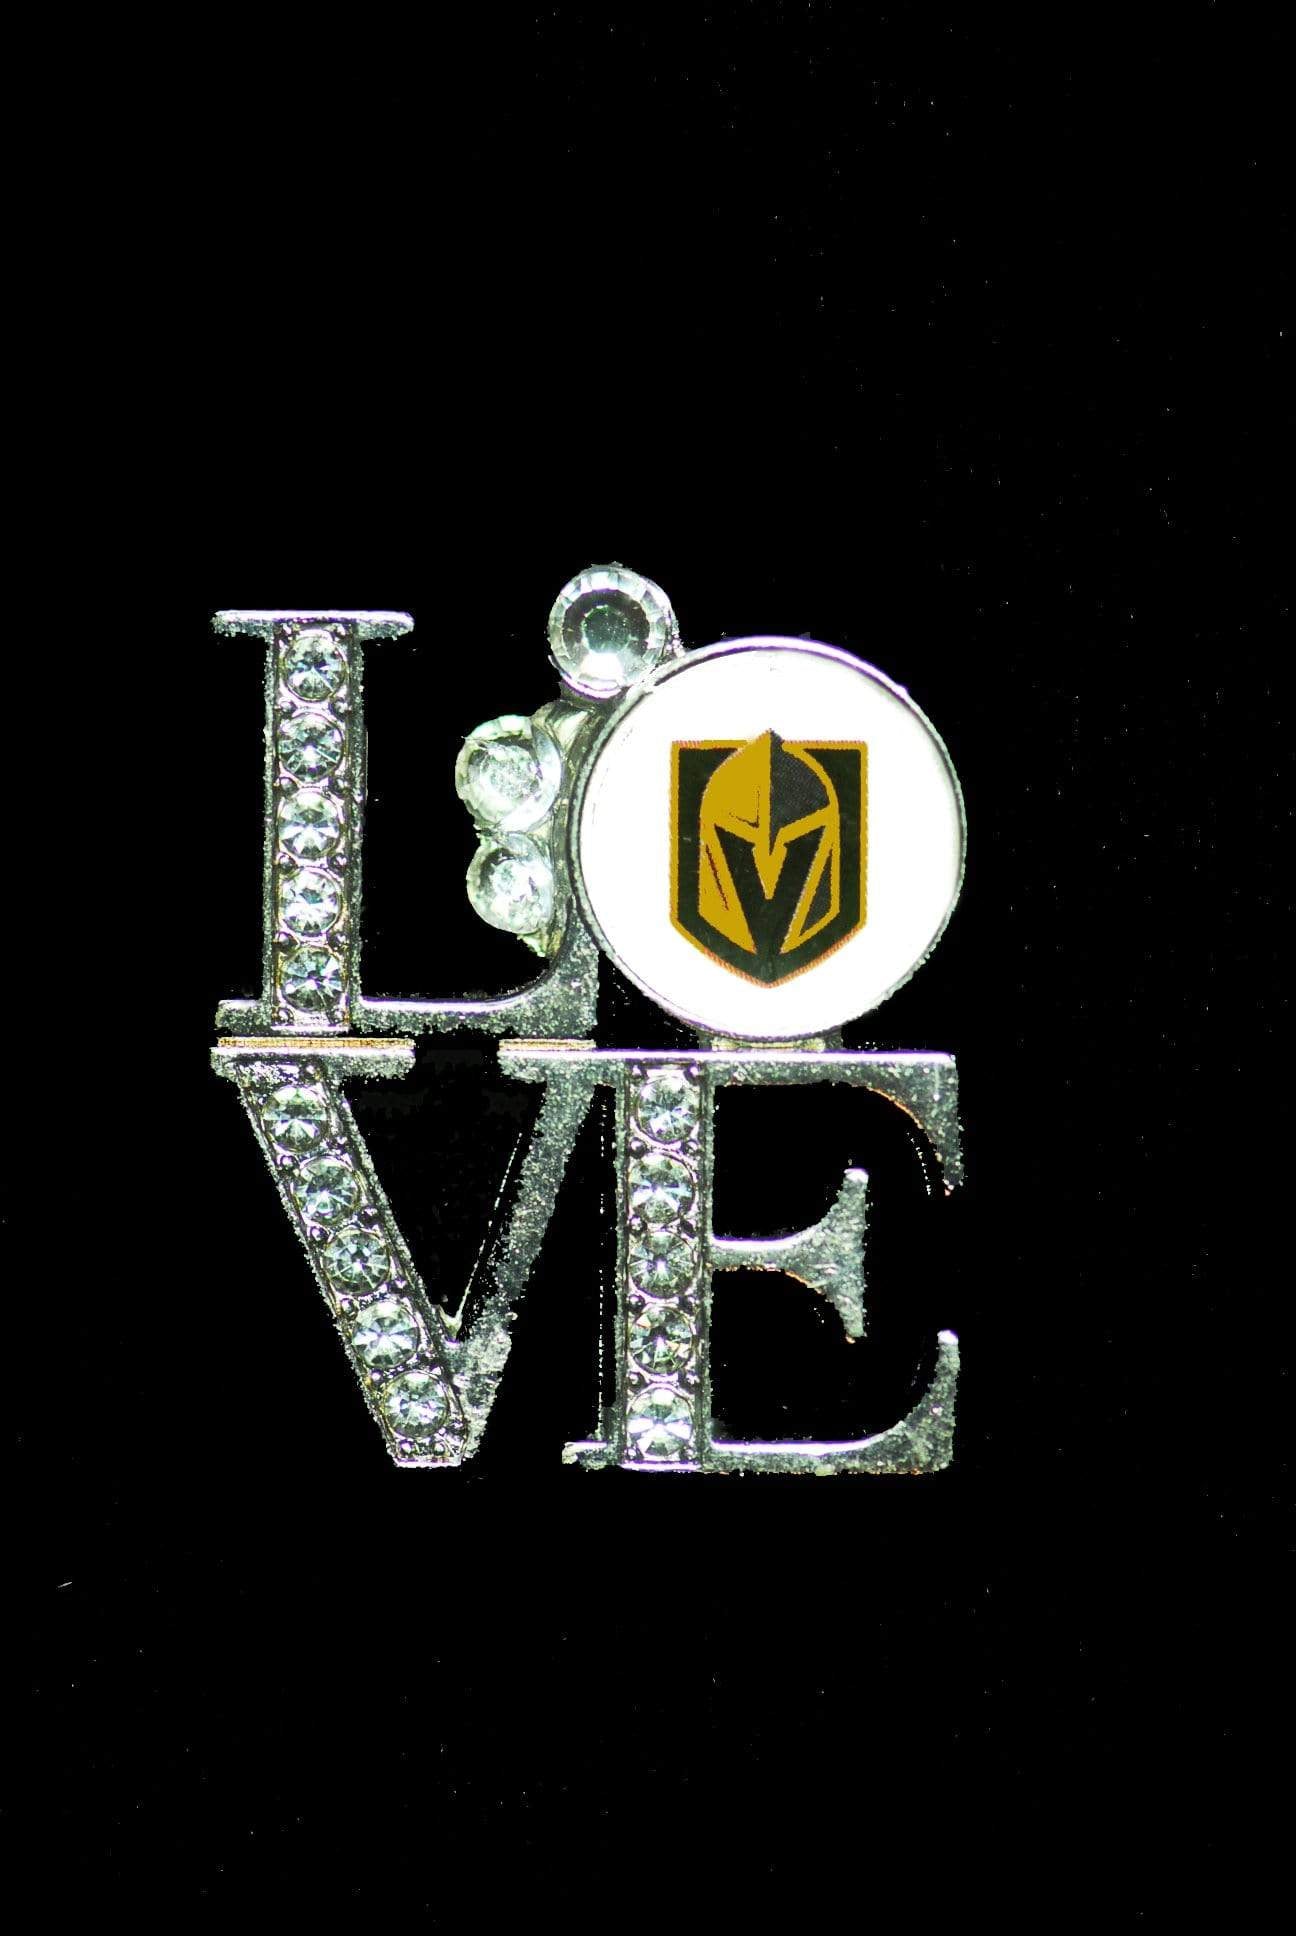 Drinkware A- VGN Love Tipsy Sip 1 1/4" x 1" Winey Bitches Co Tipsy Sips Las Vegas Golden Knights "Magnetic Bling for your Glass" Many styles to choose from WineyBitchesCo